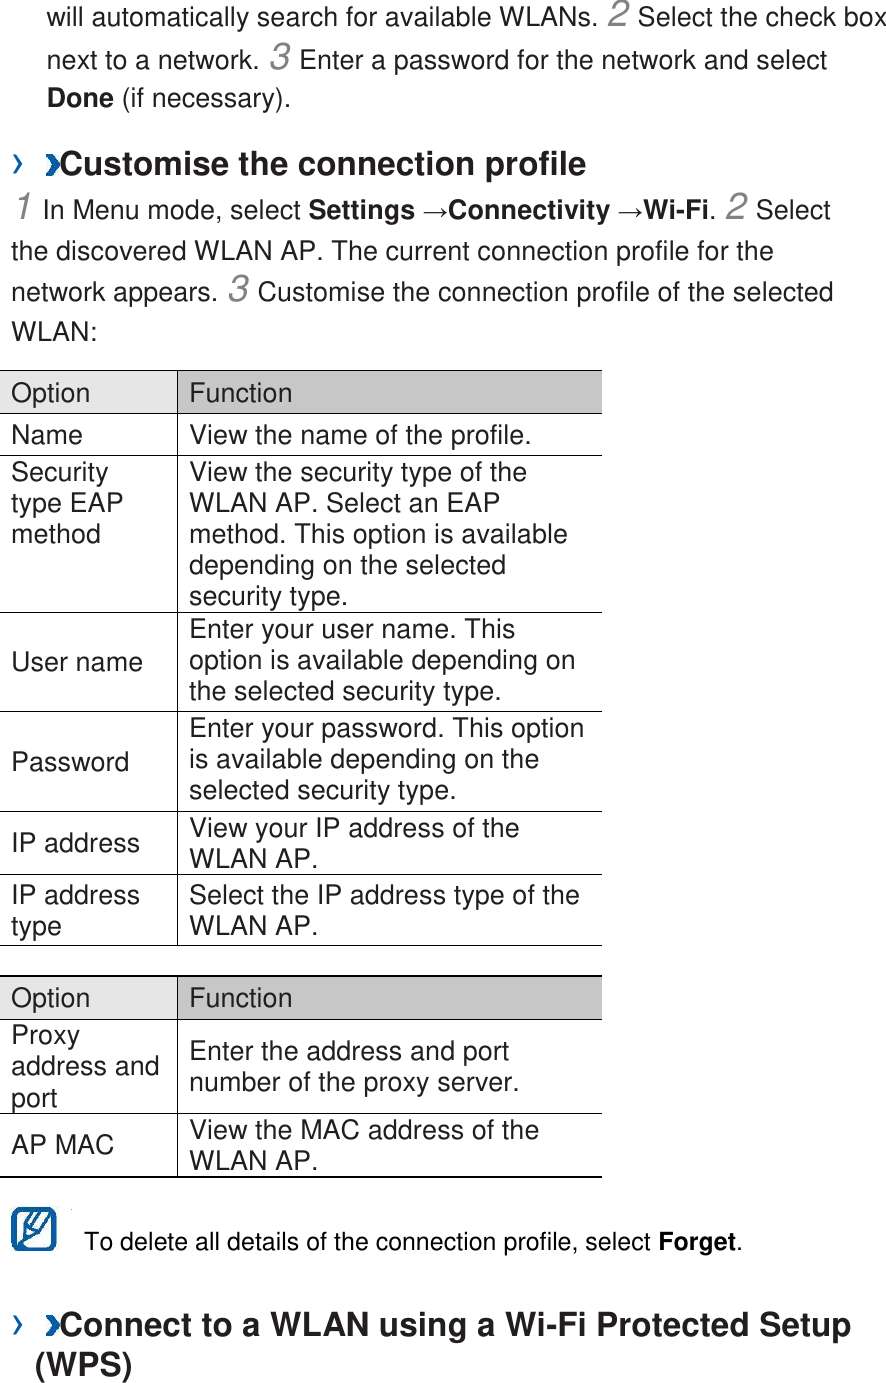 will automatically search for available WLANs. 2 Select the check boxnext to a network. 3 Enter a password for the network and selectDone (if necessary).   ›  Customise the connection profile1 In Menu mode, select Settings →Connectivity →Wi-Fi. 2 Selectthe discovered WLAN AP. The current connection profile for the network appears. 3 Customise the connection profile of the selectedWLAN:   Option Function Name View the name of the profile. Security type EAP method View the security type of the WLAN AP. Select an EAP method. This option is available depending on the selected security type.   User name Enter your user name. This option is available depending on the selected security type.   Password Enter your password. This option is available depending on the selected security type.   IP address View your IP address of the WLAN AP.   IP address type   Select the IP address type of the WLAN AP.   Option Function Proxy address and port   Enter the address and port number of the proxy server. AP MAC View the MAC address of the WLAN AP.   To delete all details of the connection profile, select Forget. ›  Connect to a WLAN using a Wi-Fi Protected Setup(WPS) 